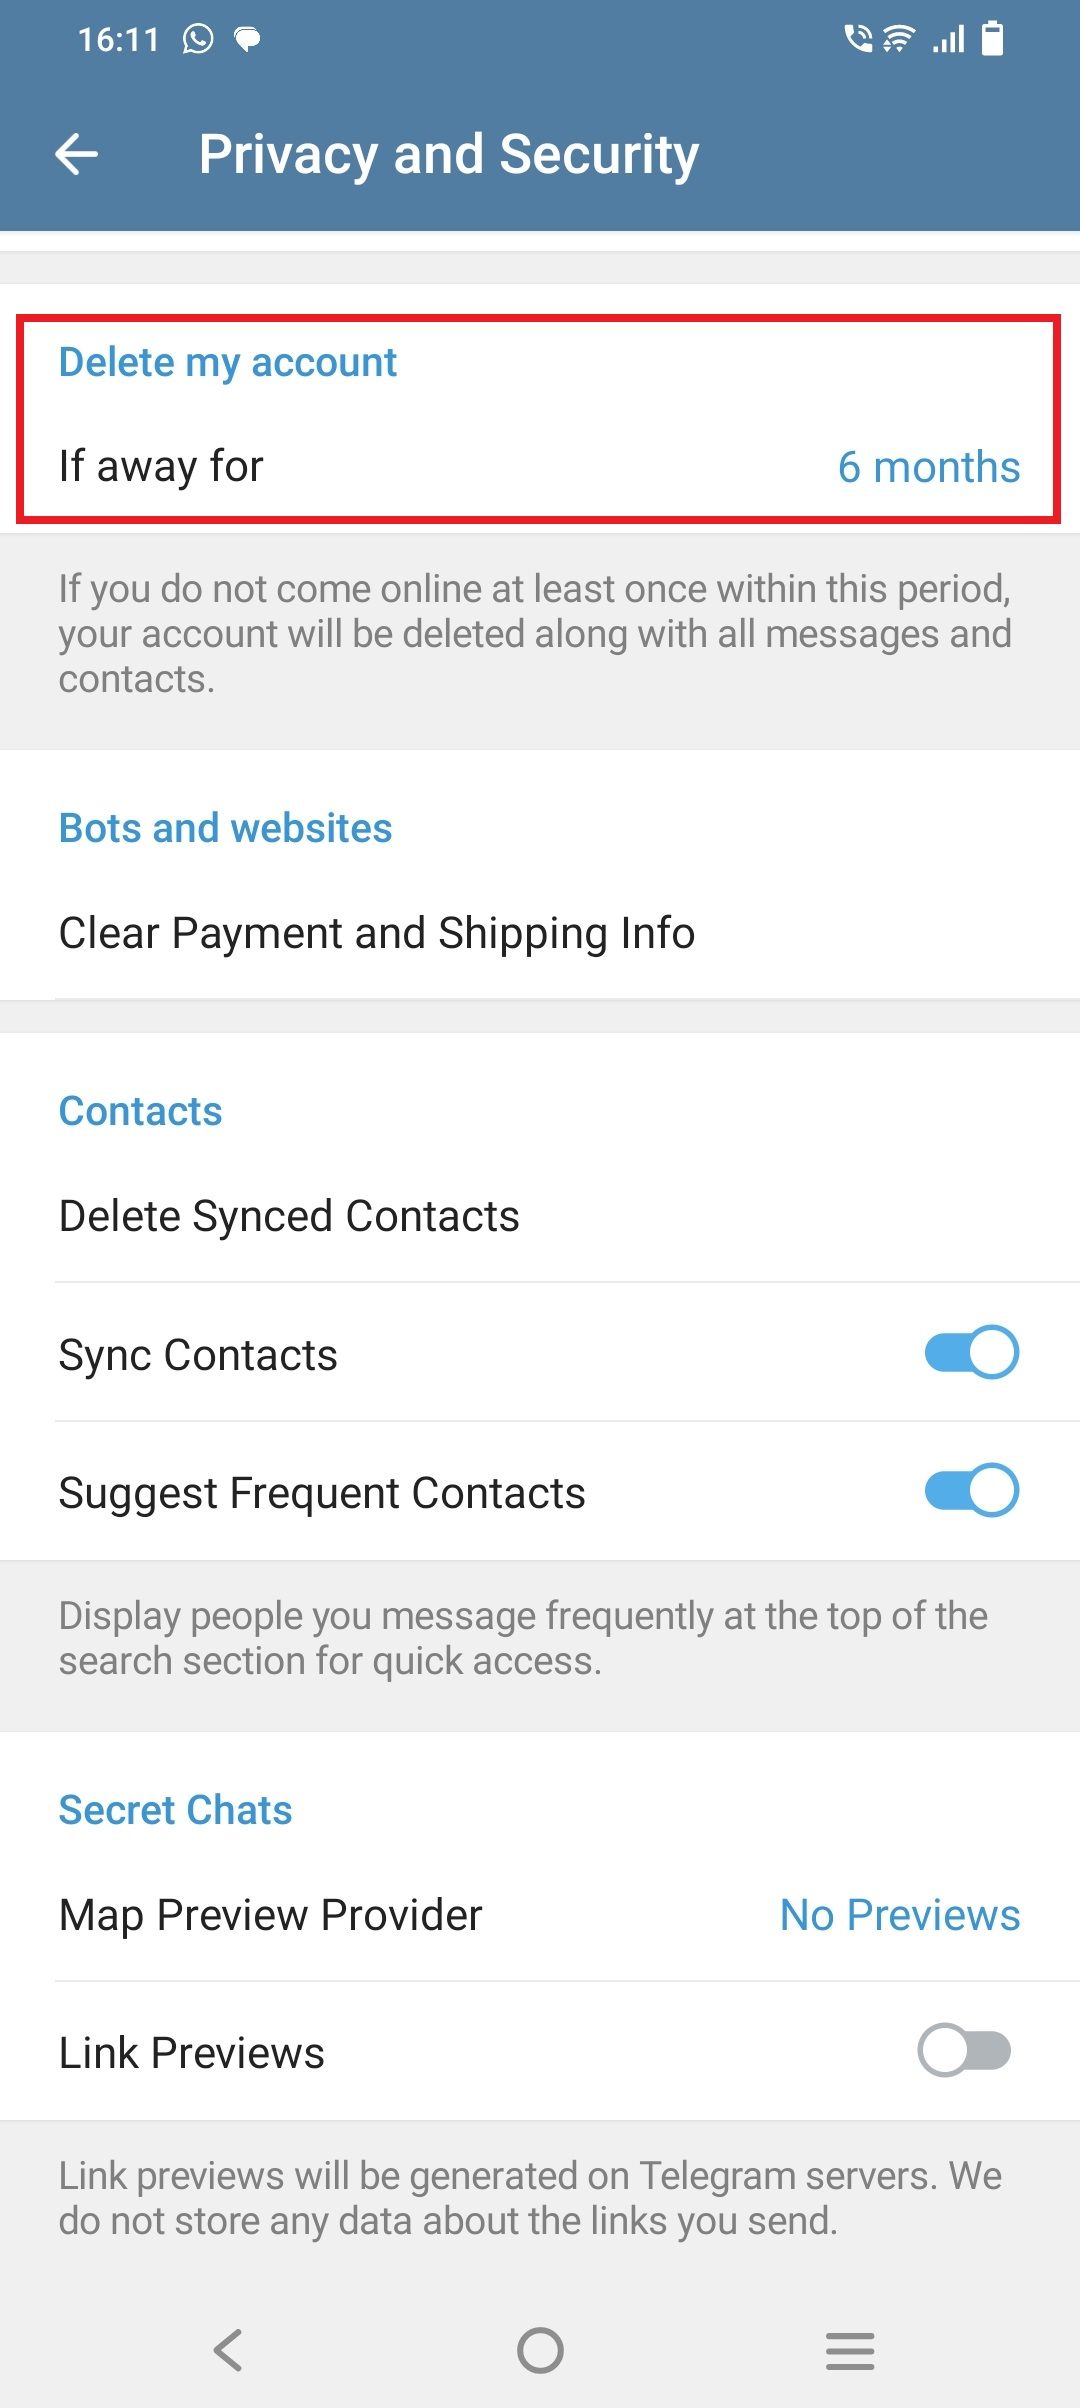 Screenshot of Telegram's Privacy and Security menu, highlighting 'Delete my account' option.